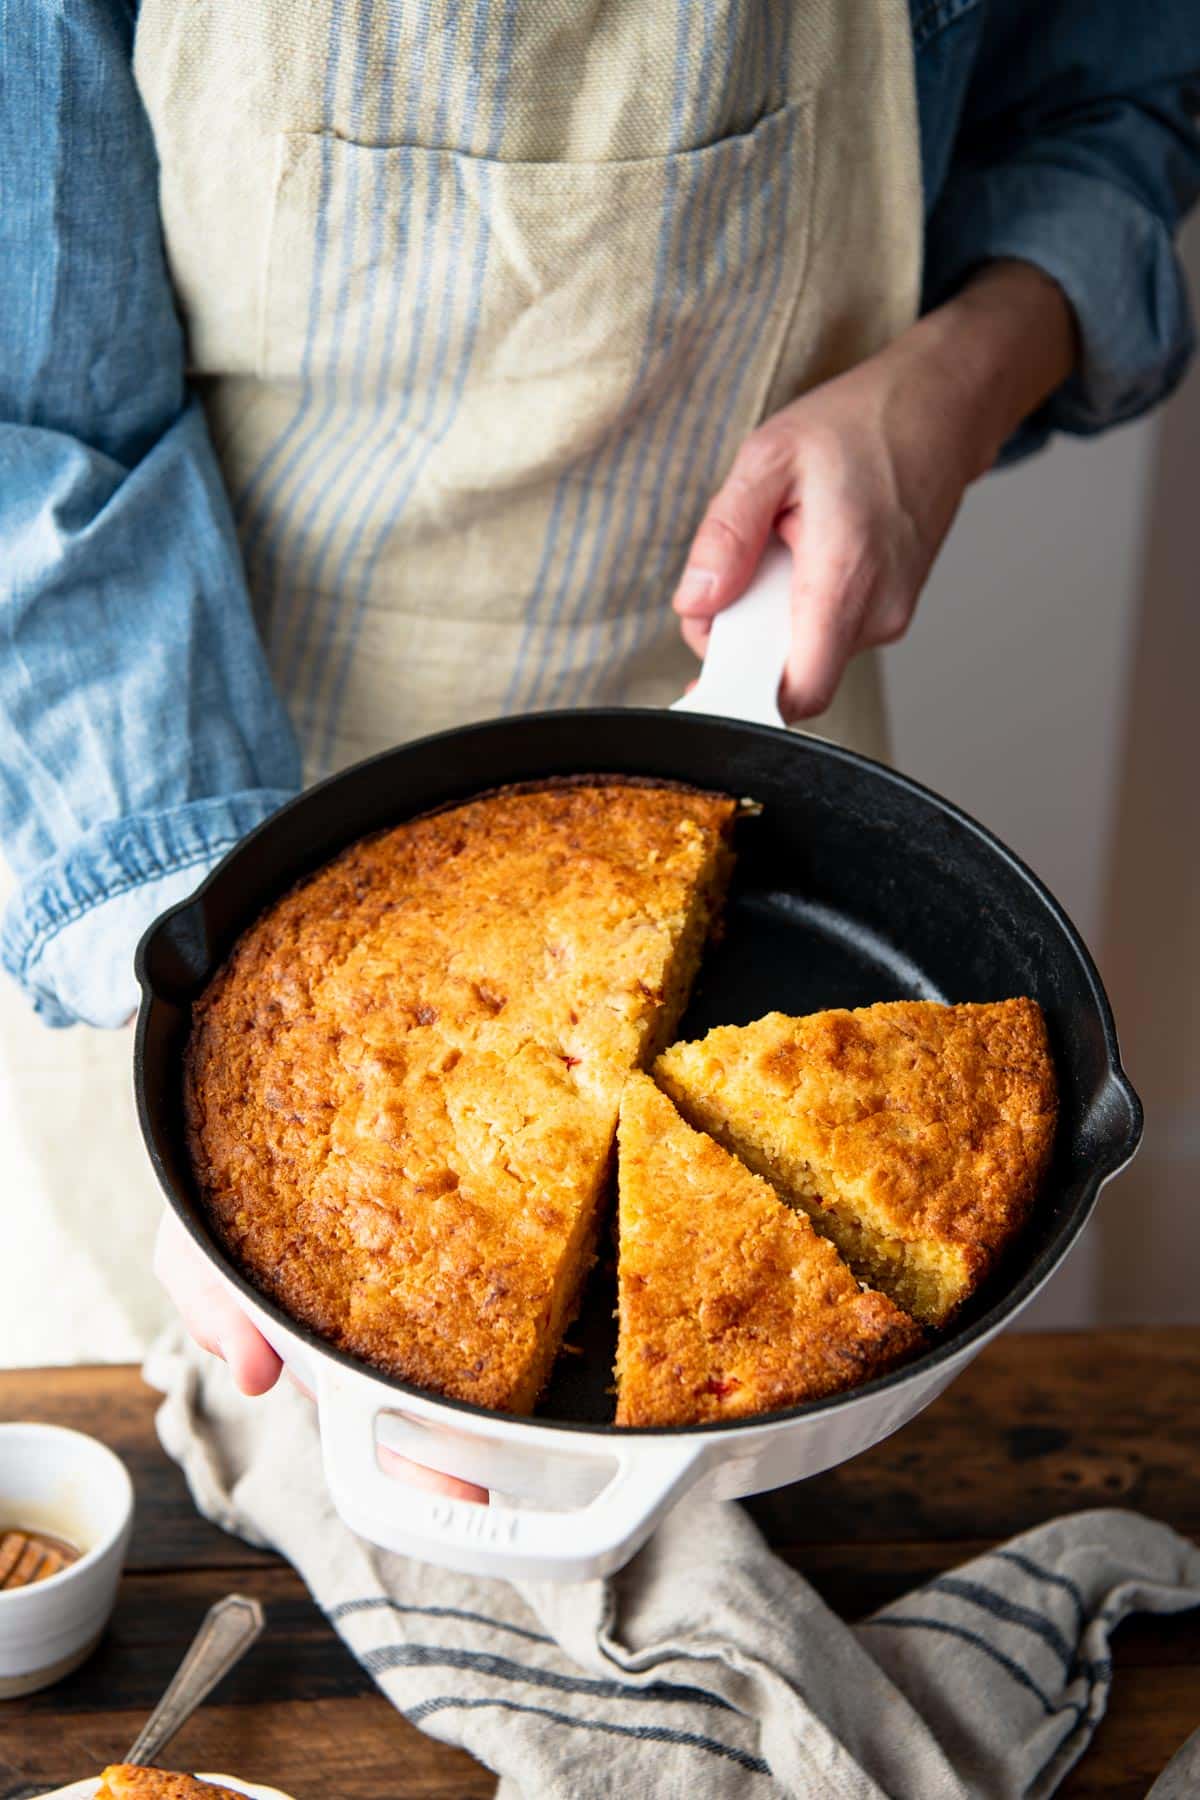 Hands holding a moist cornbread recipe baked in a cast iron skillet.